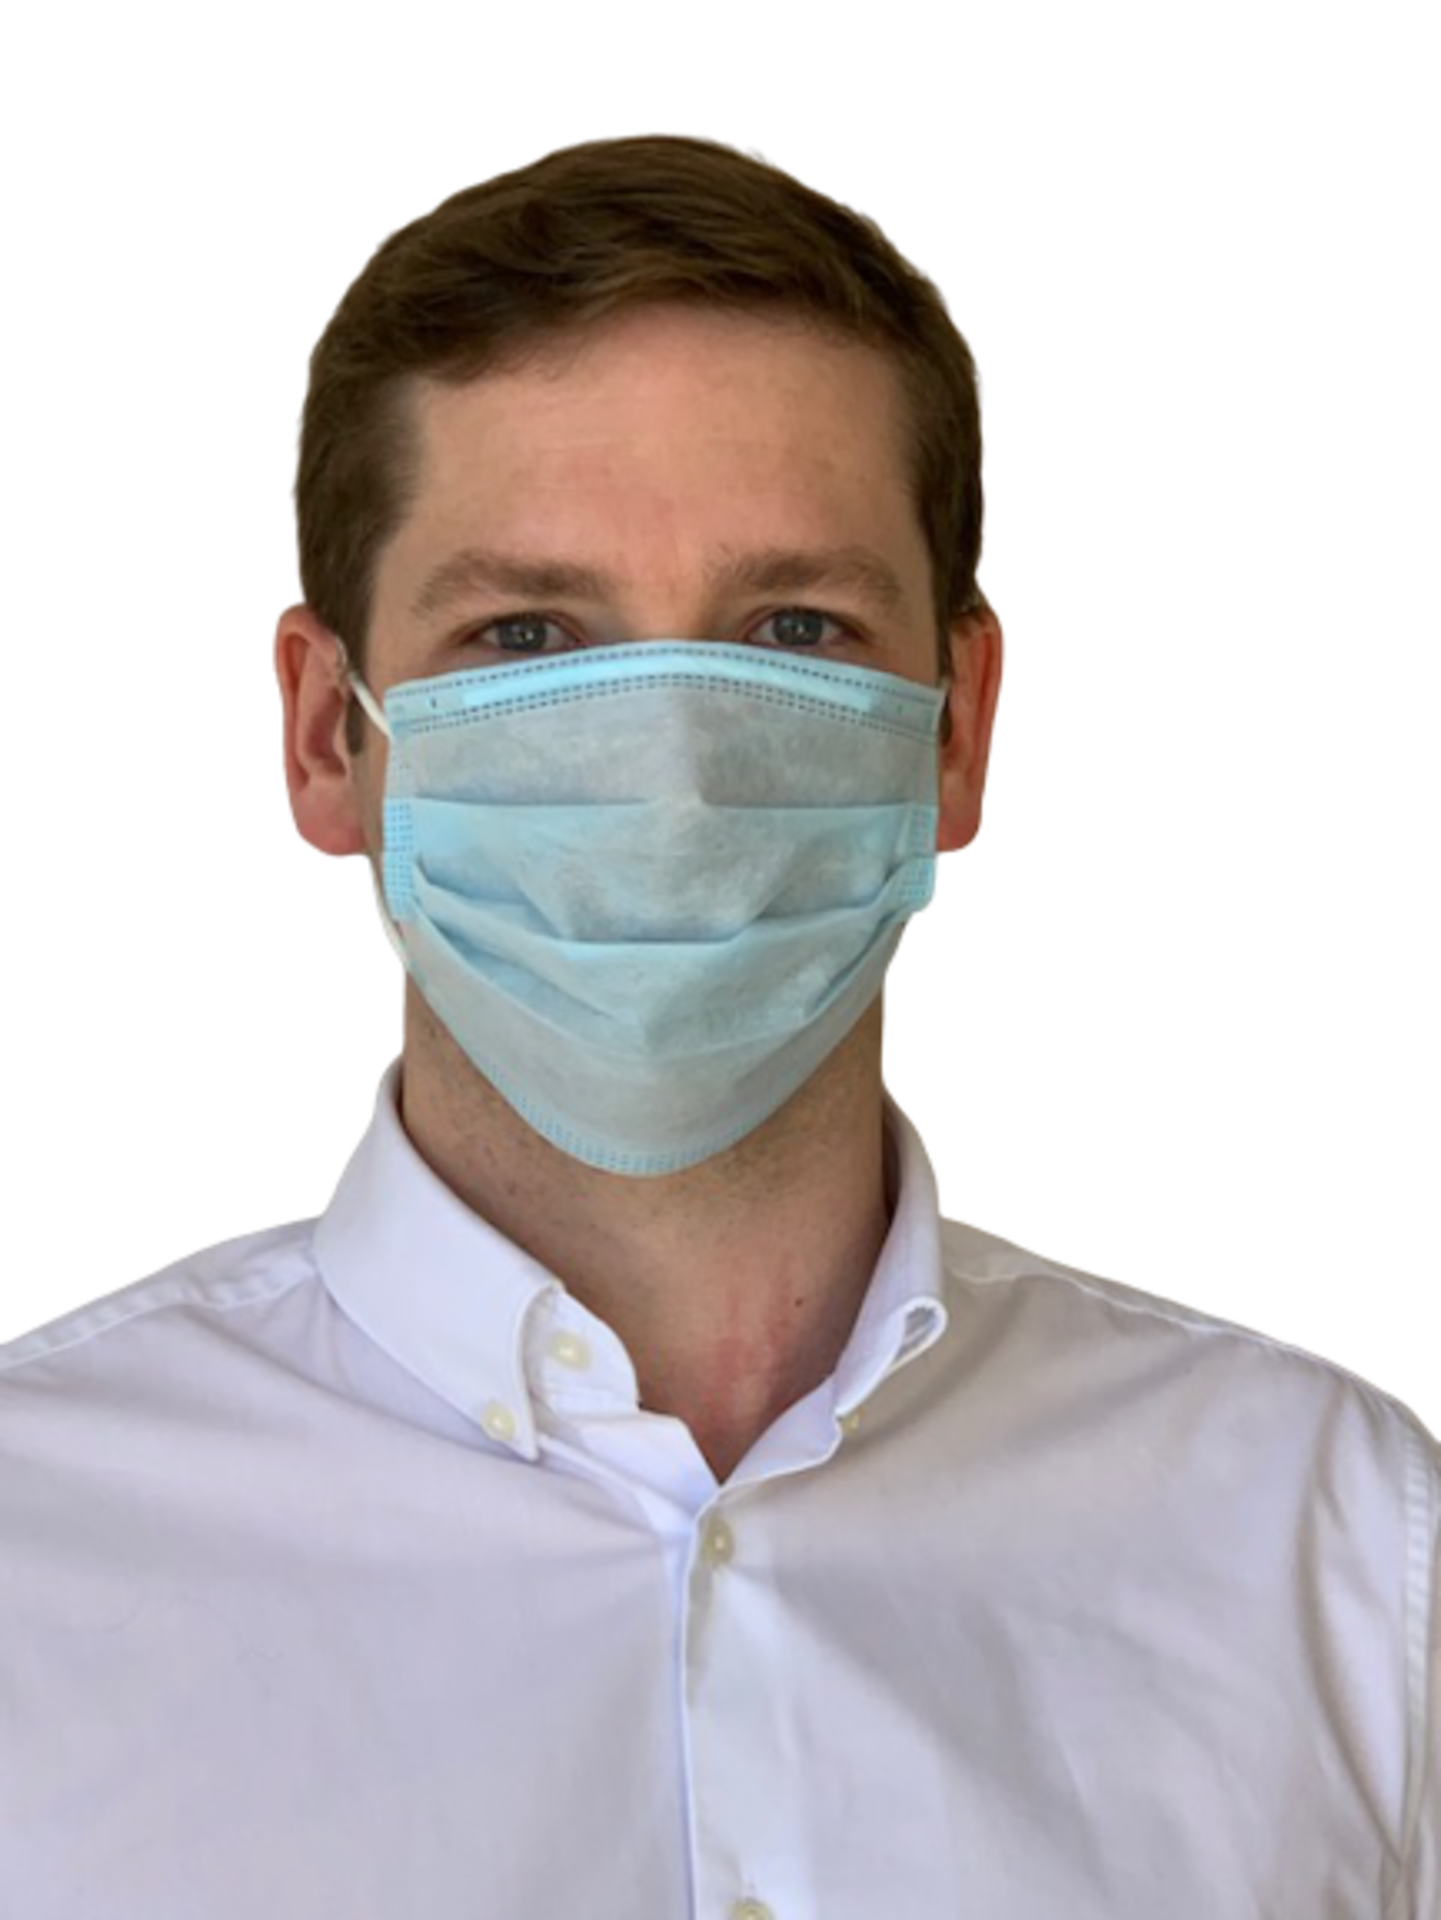 Type IIR Triple Layer Surgical Face Masks (2000pcs) UK delivery included - Image 7 of 8